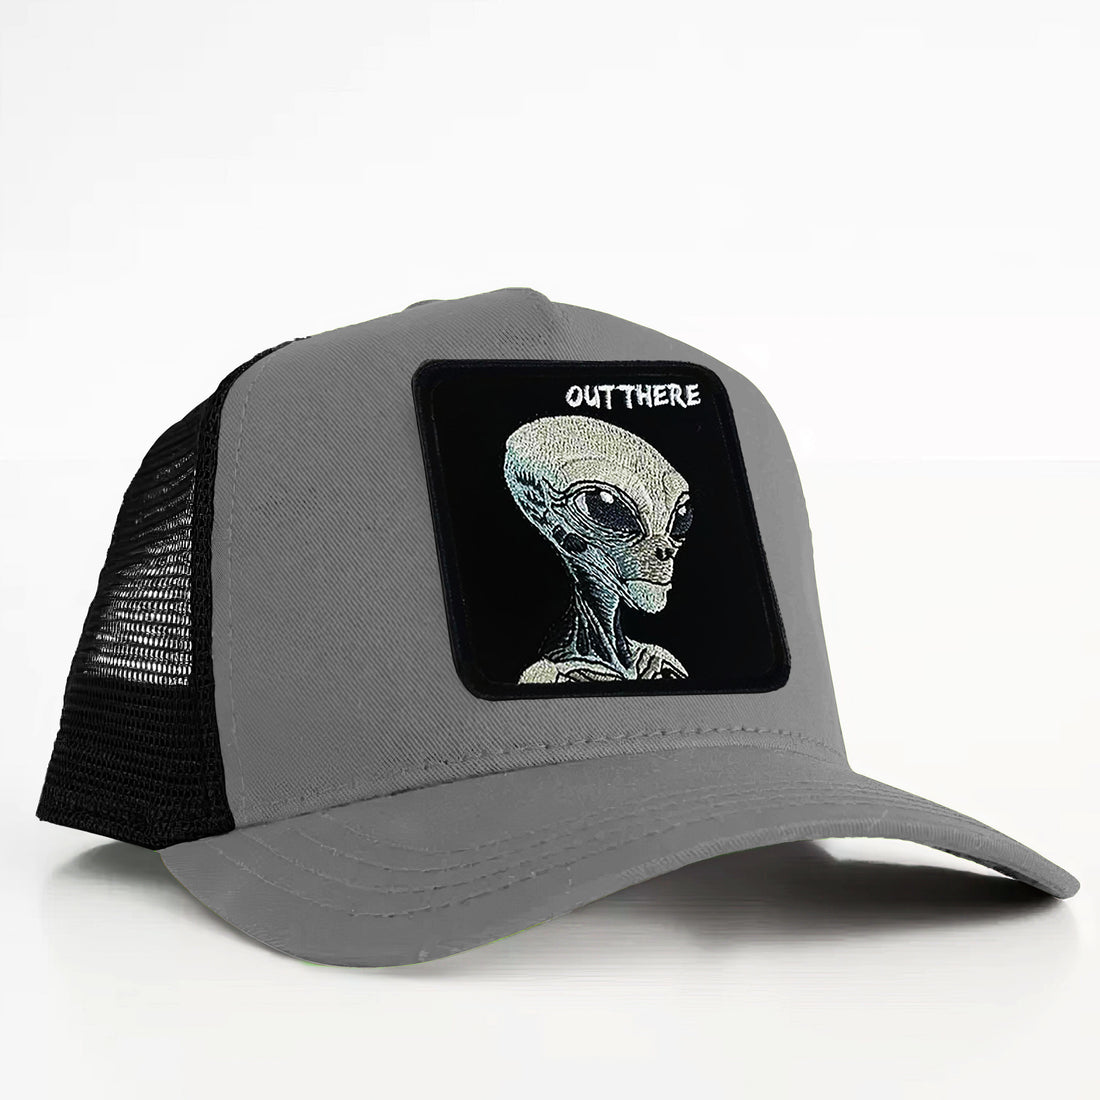 Alien Gray "out there" trucker hat